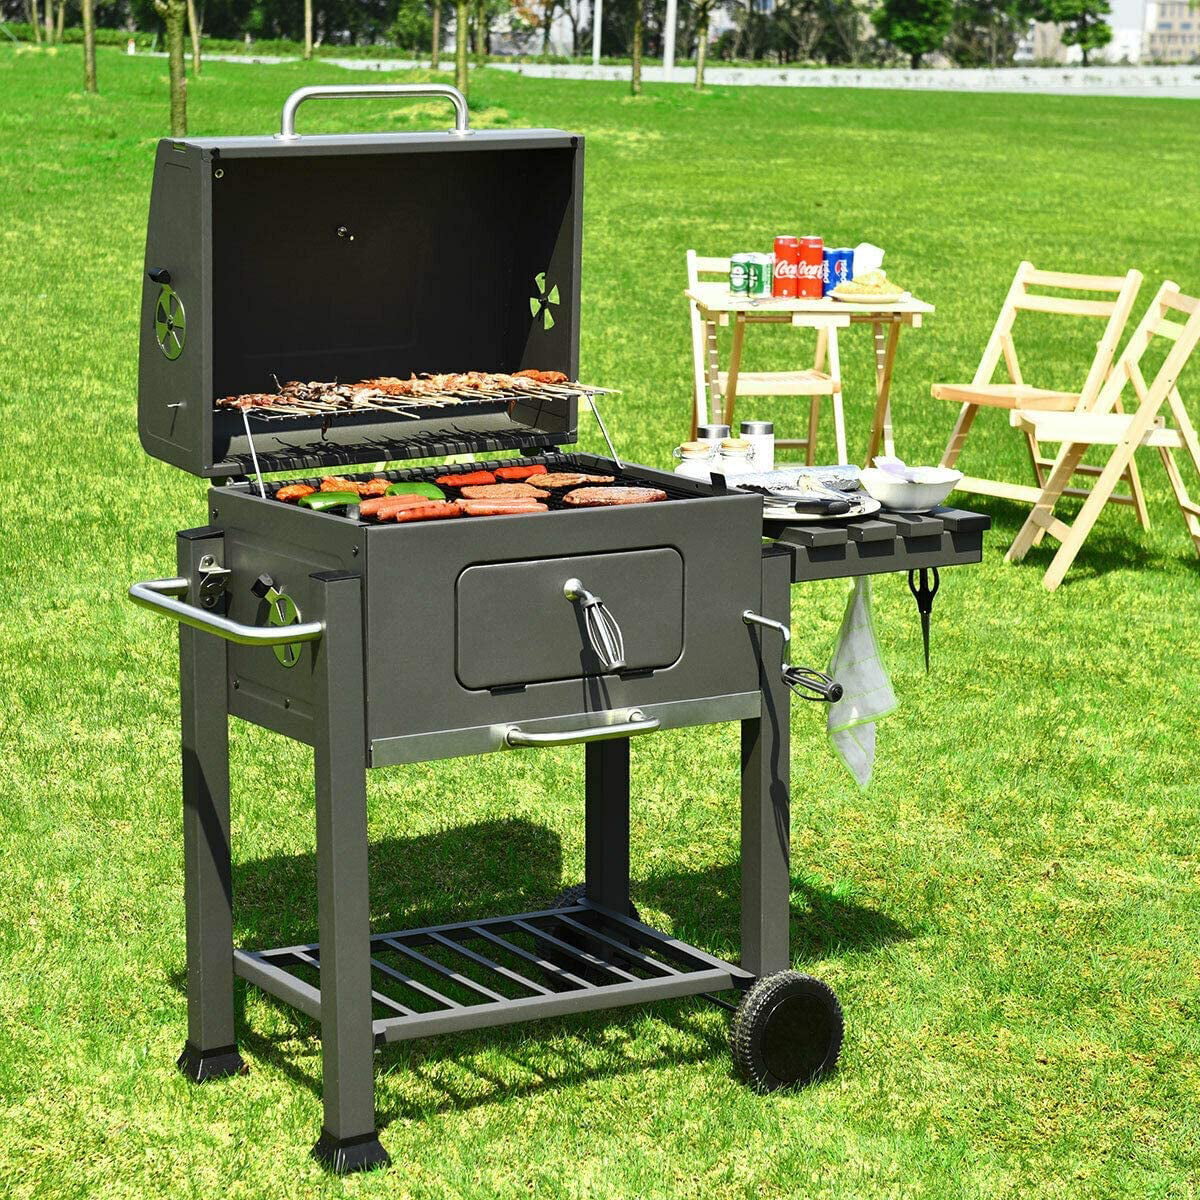 BBQ Charcoal Grill Backyard Barbecue Cooking Outdoor Patio Portable with Wheels 